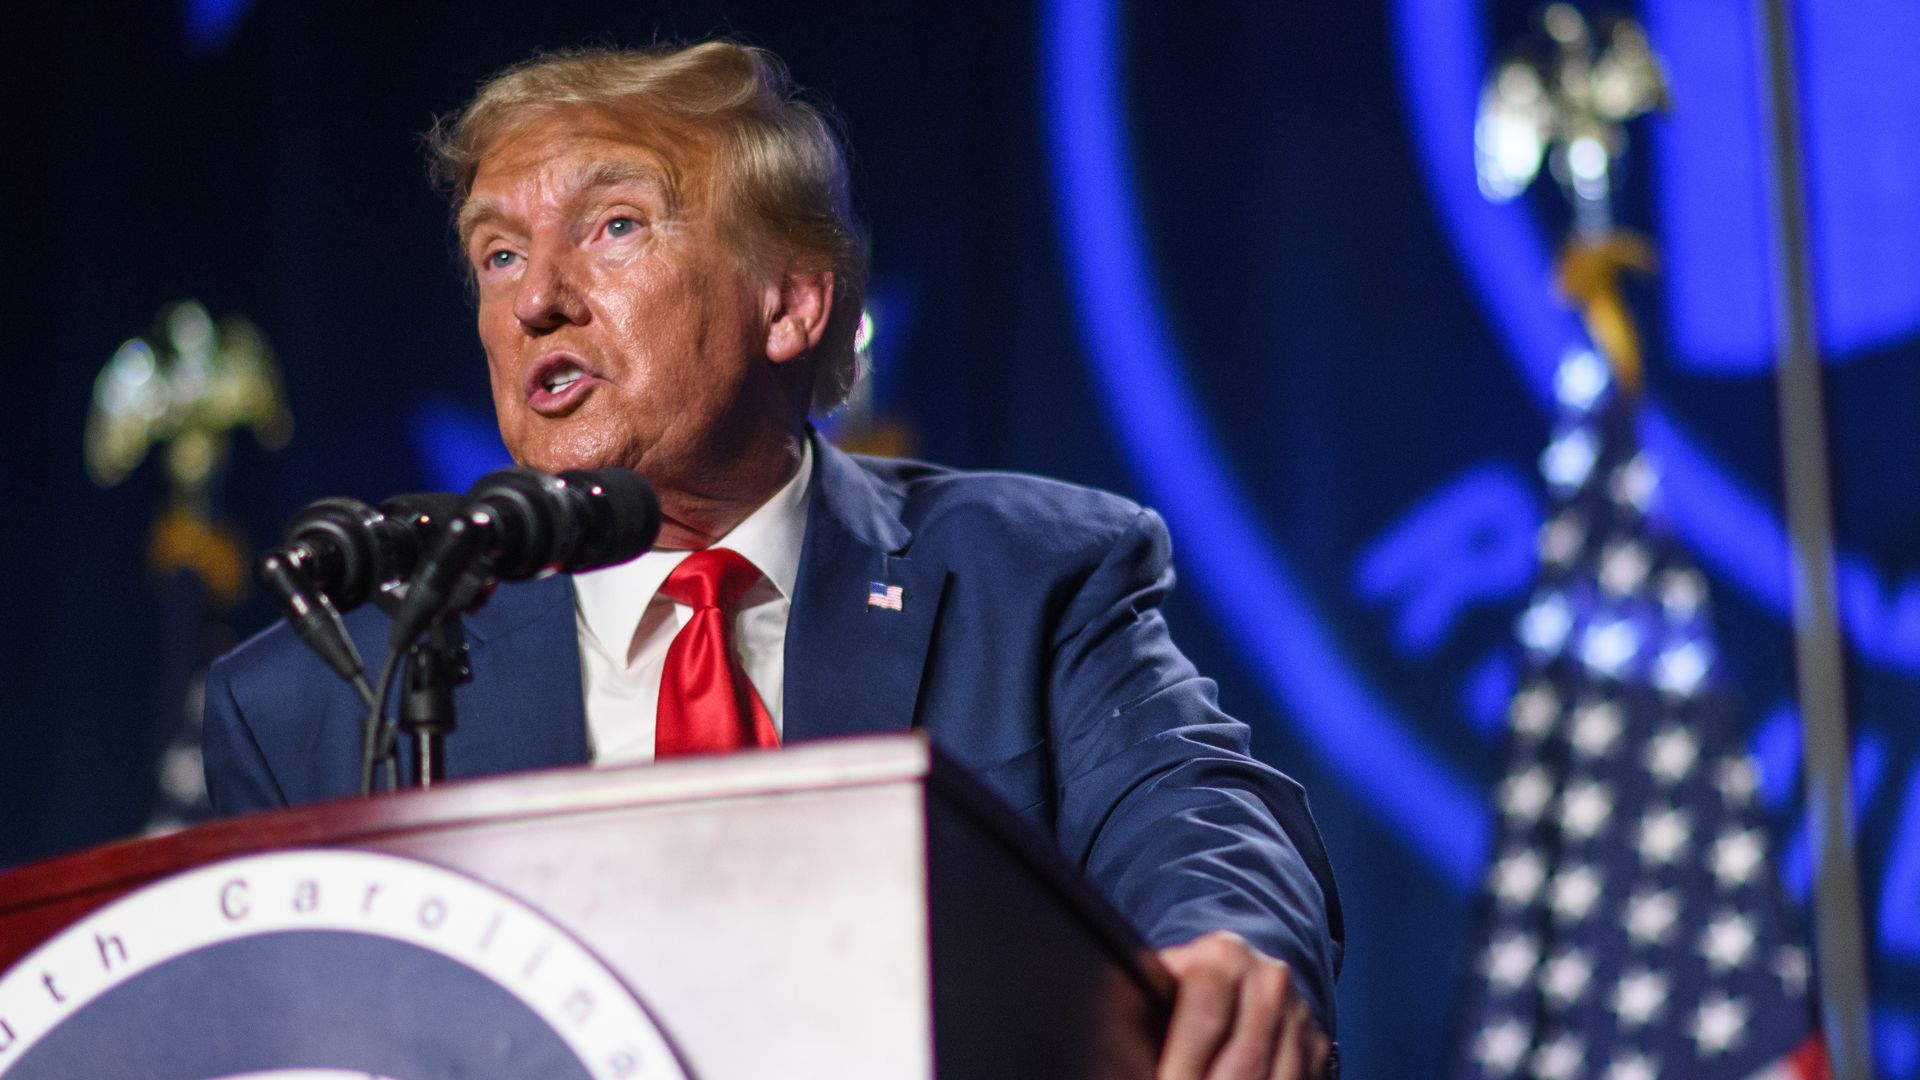 Donald Trump speaks as the keynote speaker at the 56th Annual Silver Elephant Dinner hosted by the South Carolina Republican Party on August 5, 2023 in Columbia, South Carolina.